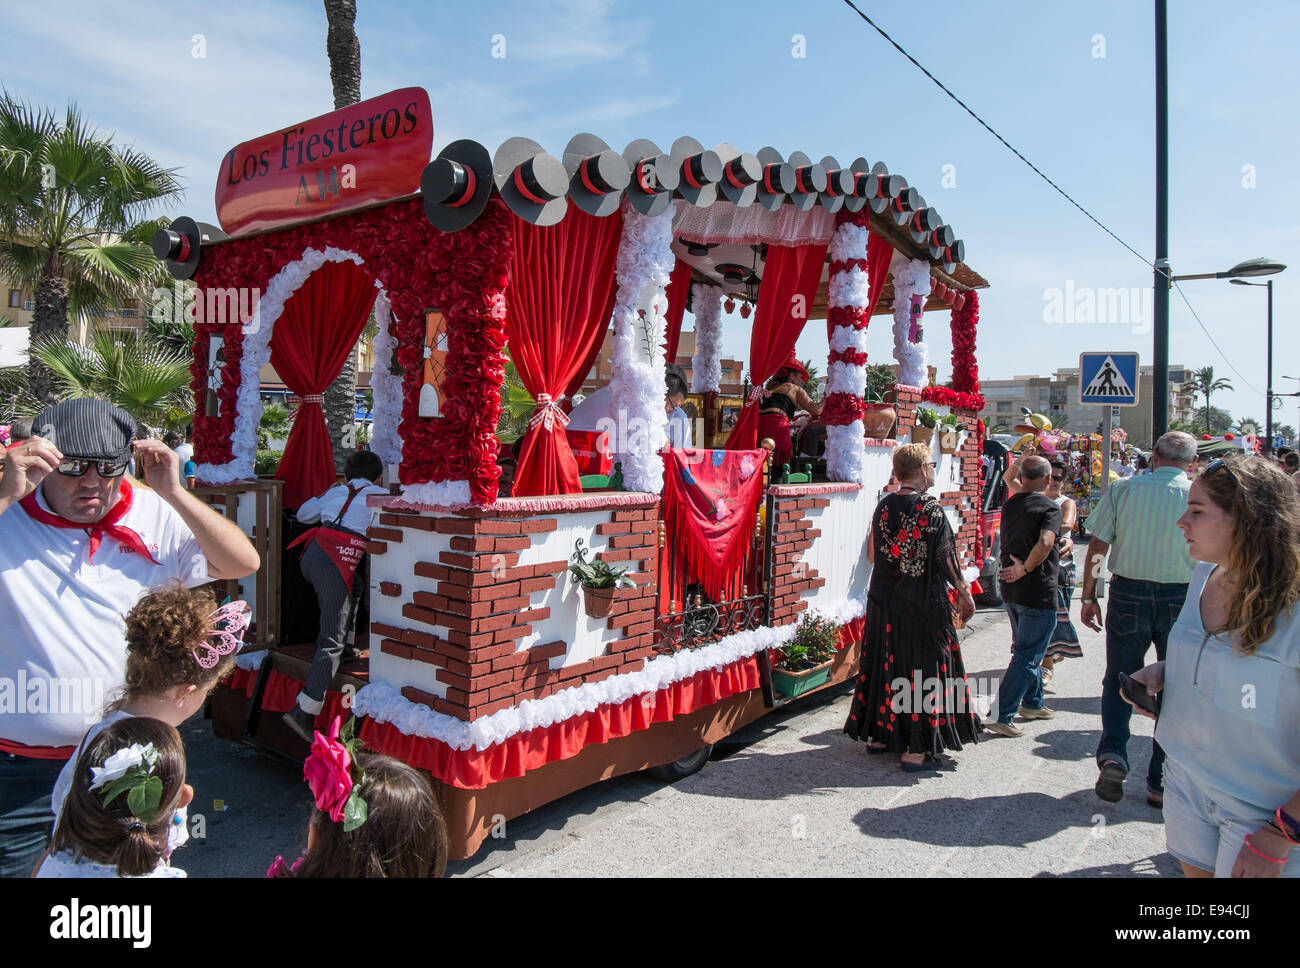 Decorated Floats With Fiesta Participants Stock Photo